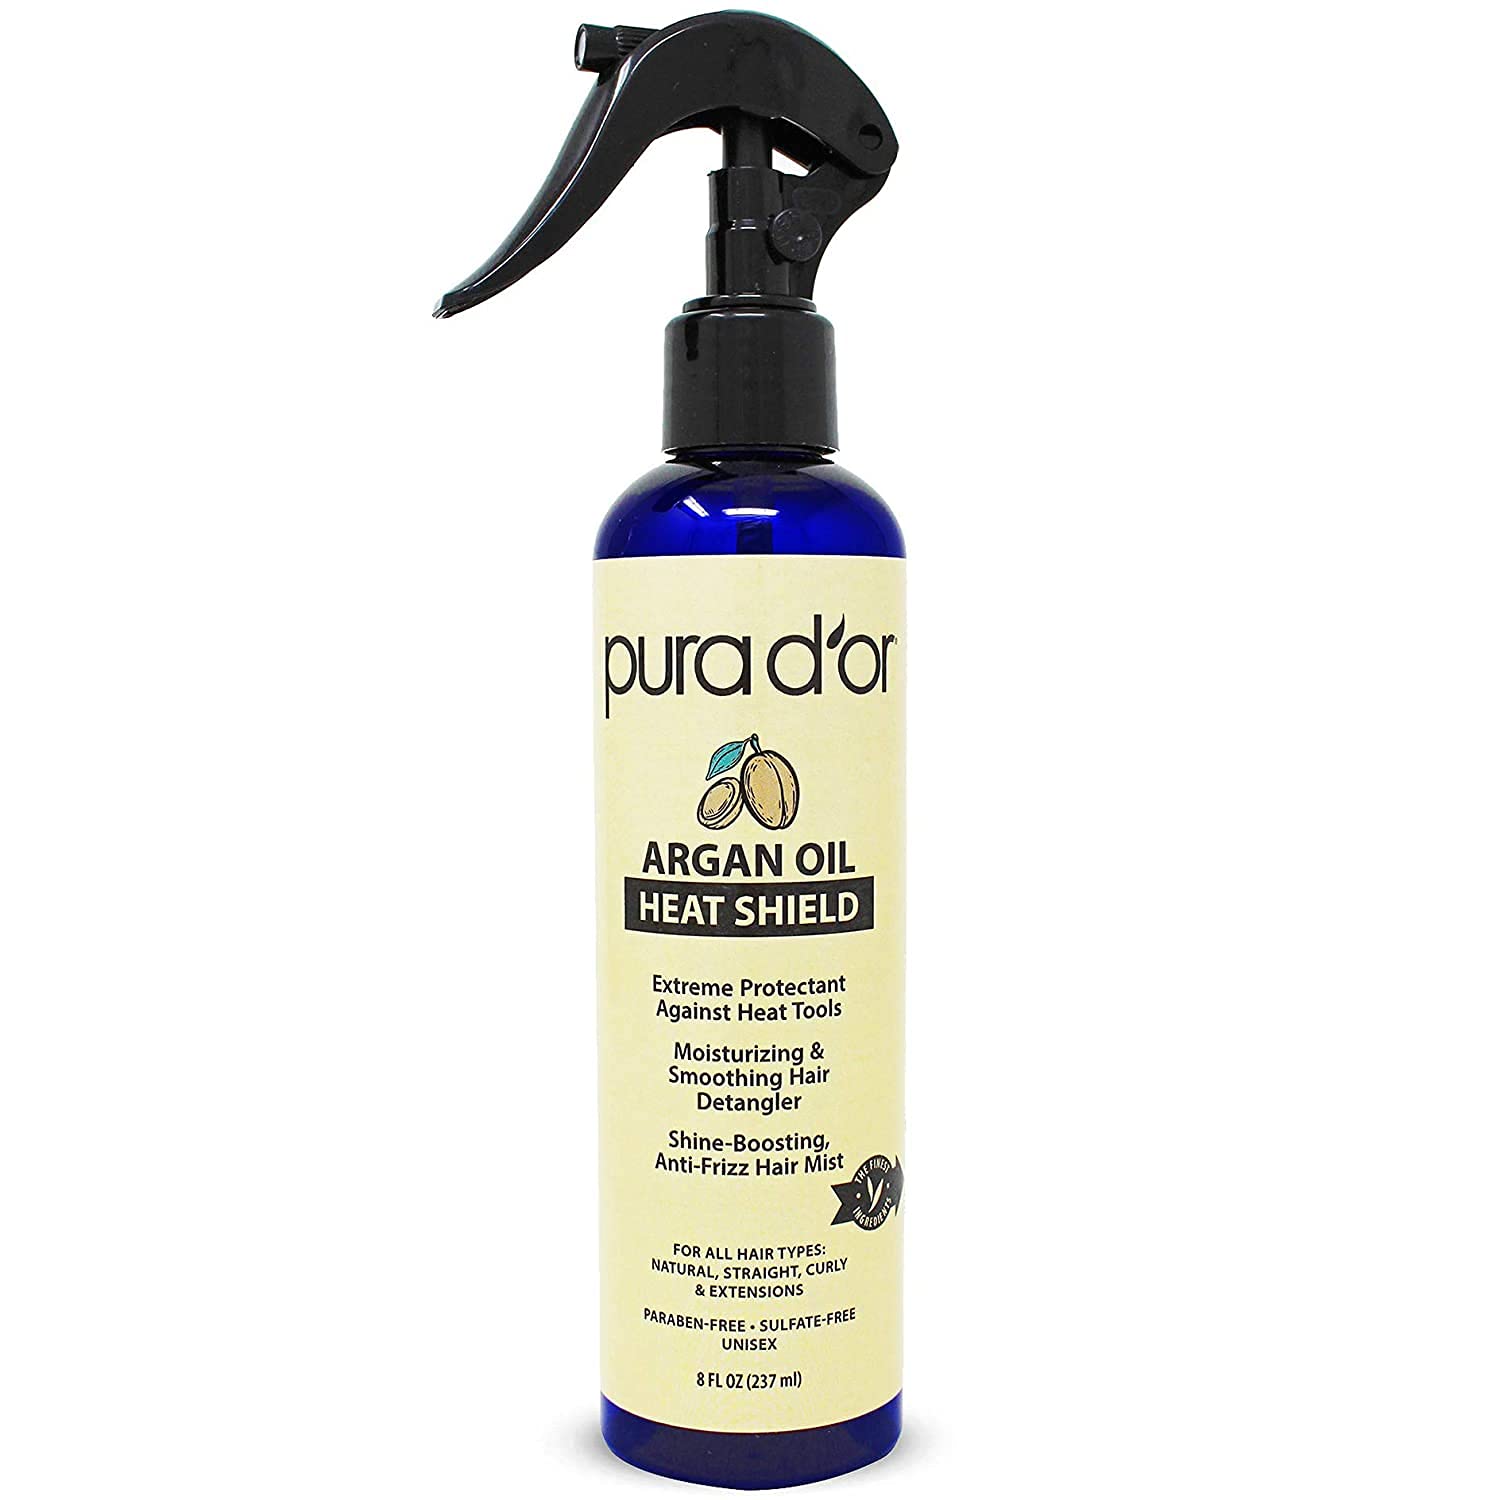 PURA D'OR Argan Oil Heat Shield Protectant Spray (8oz) Water Based Formula w/Organic Ingredients, Protects Up To 450º F From Flat Iron & Hot Blow Dry, Leave-In, Define & Shine Dry & Damaged Hair